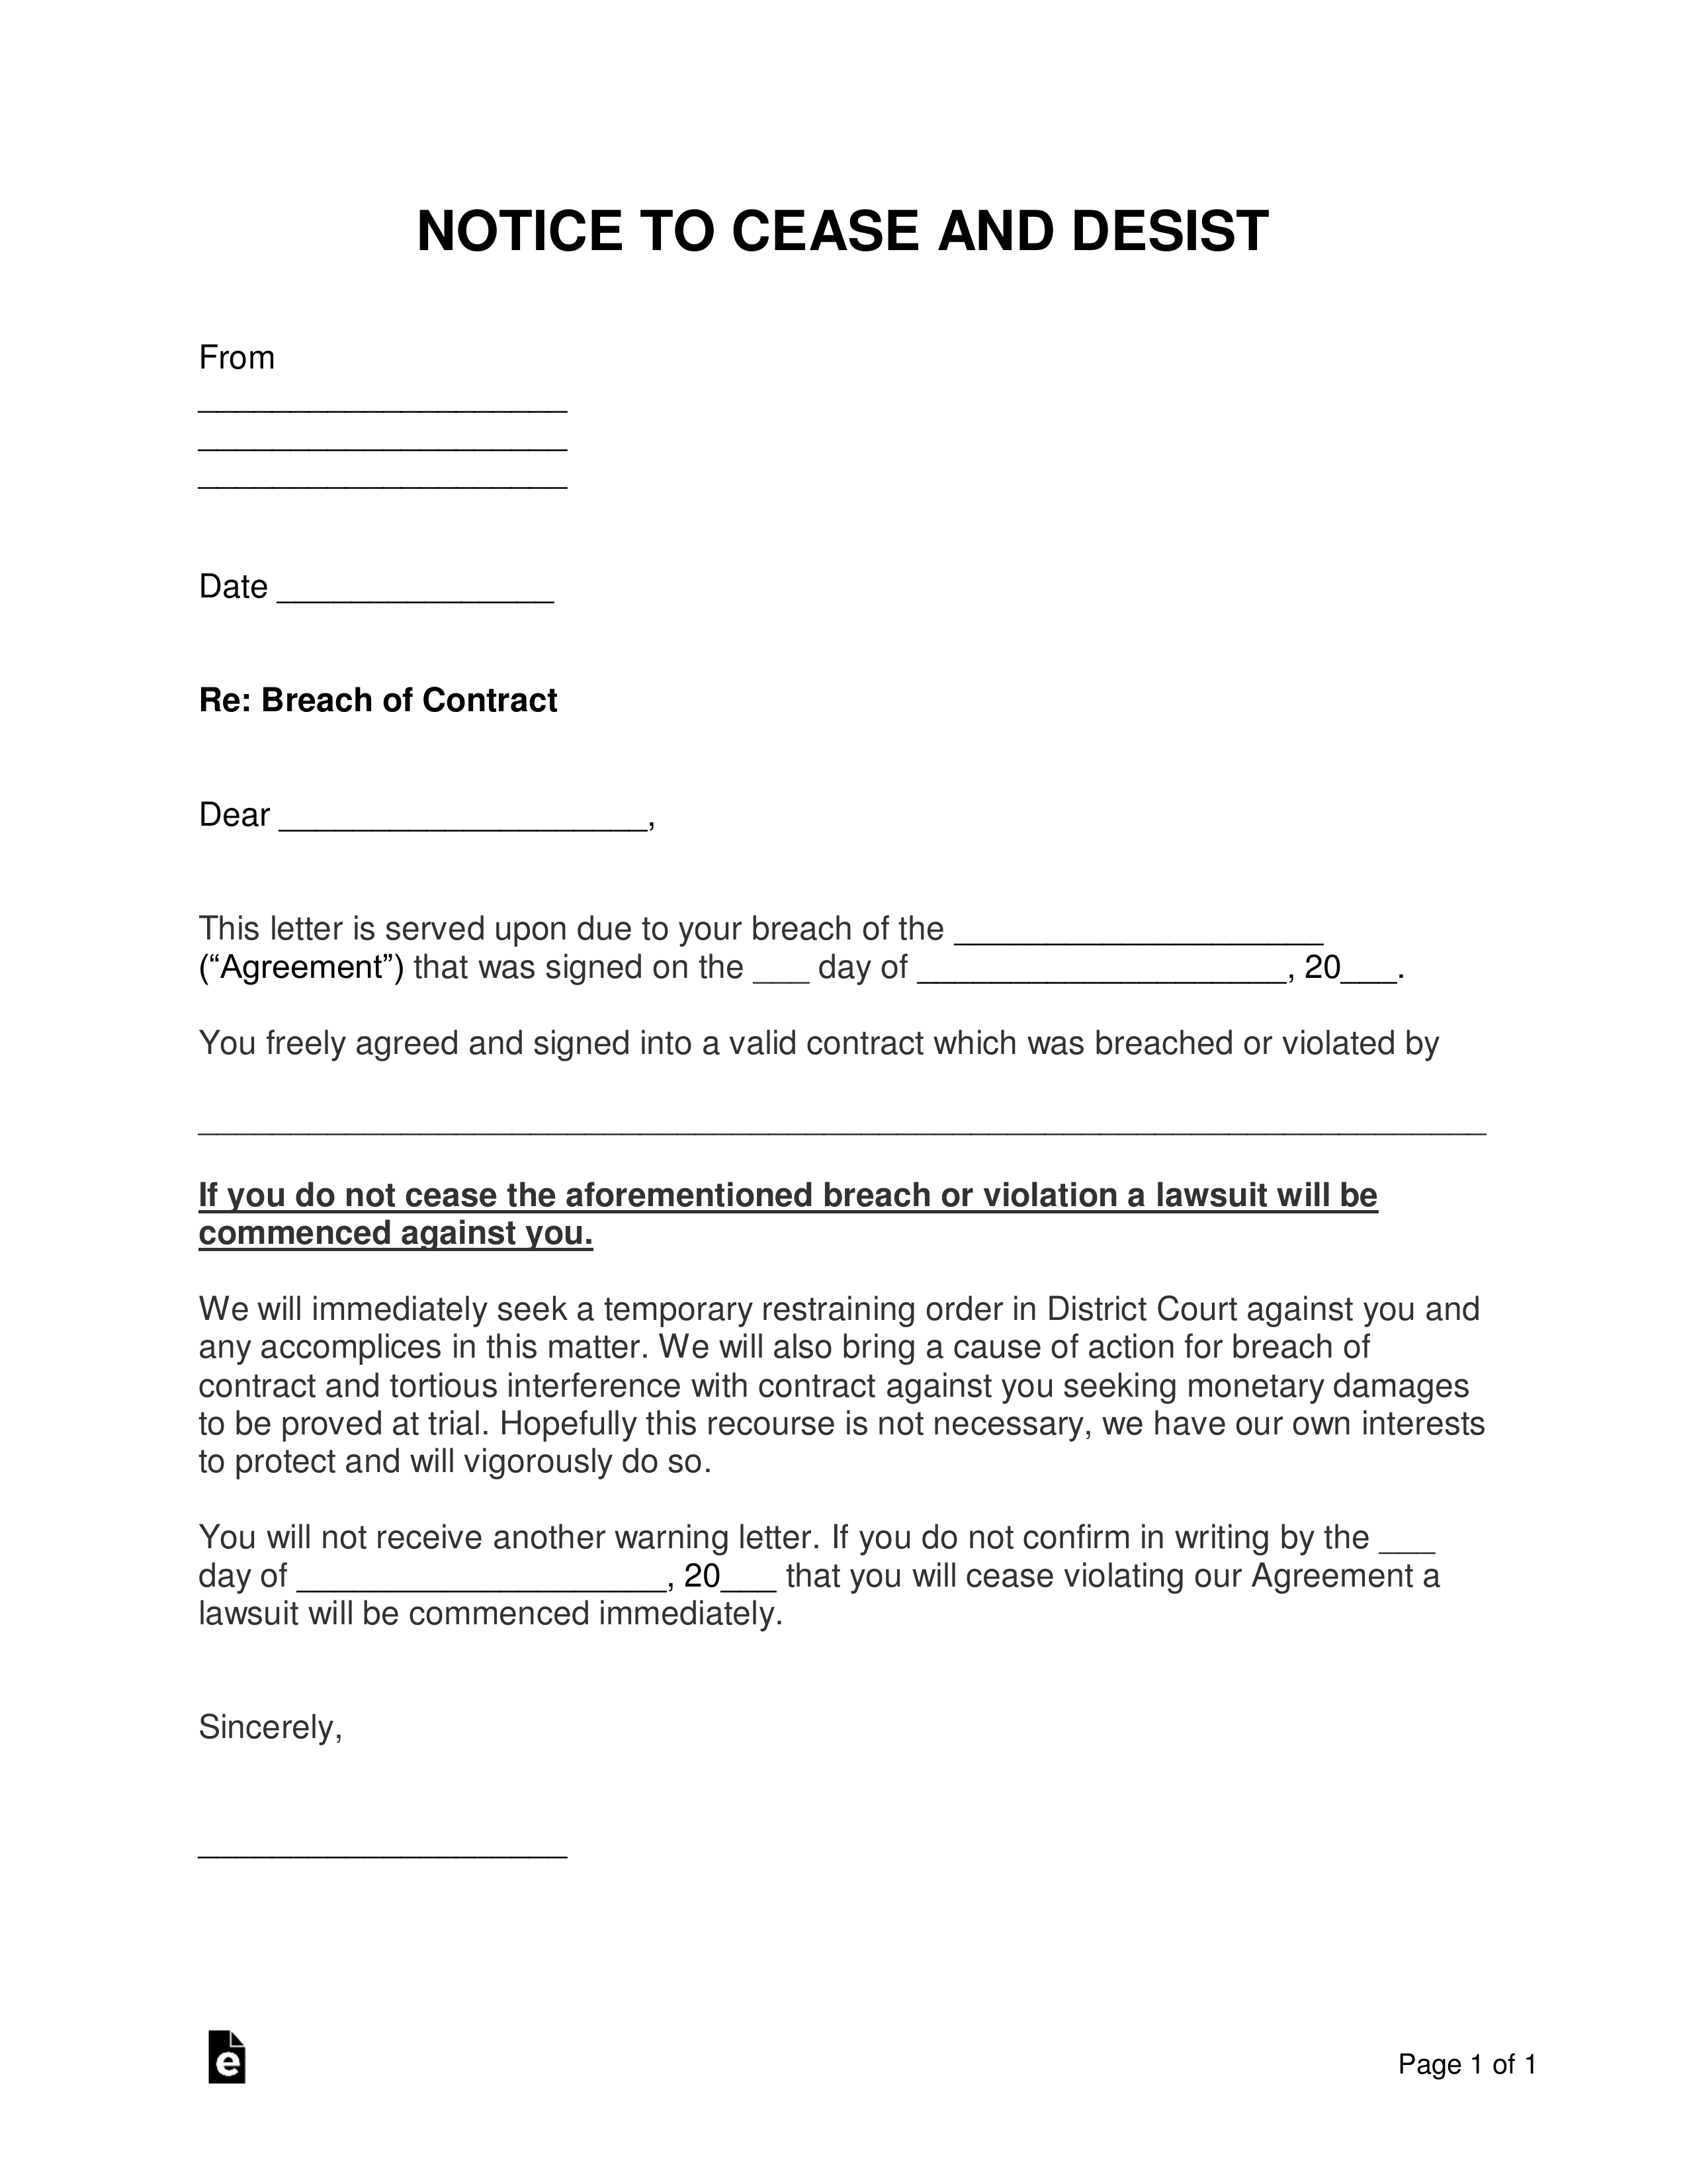 Breach Of Contract Letter from eforms.com